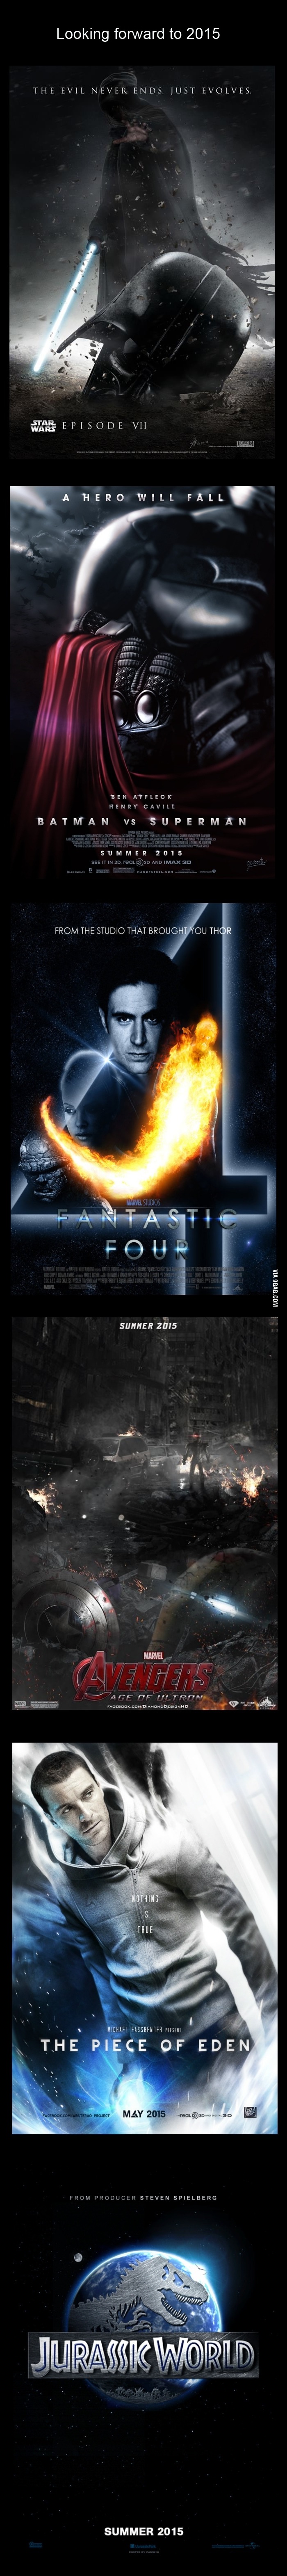 2015 movie posters, hollywood, star wars, avengers, fantastic four